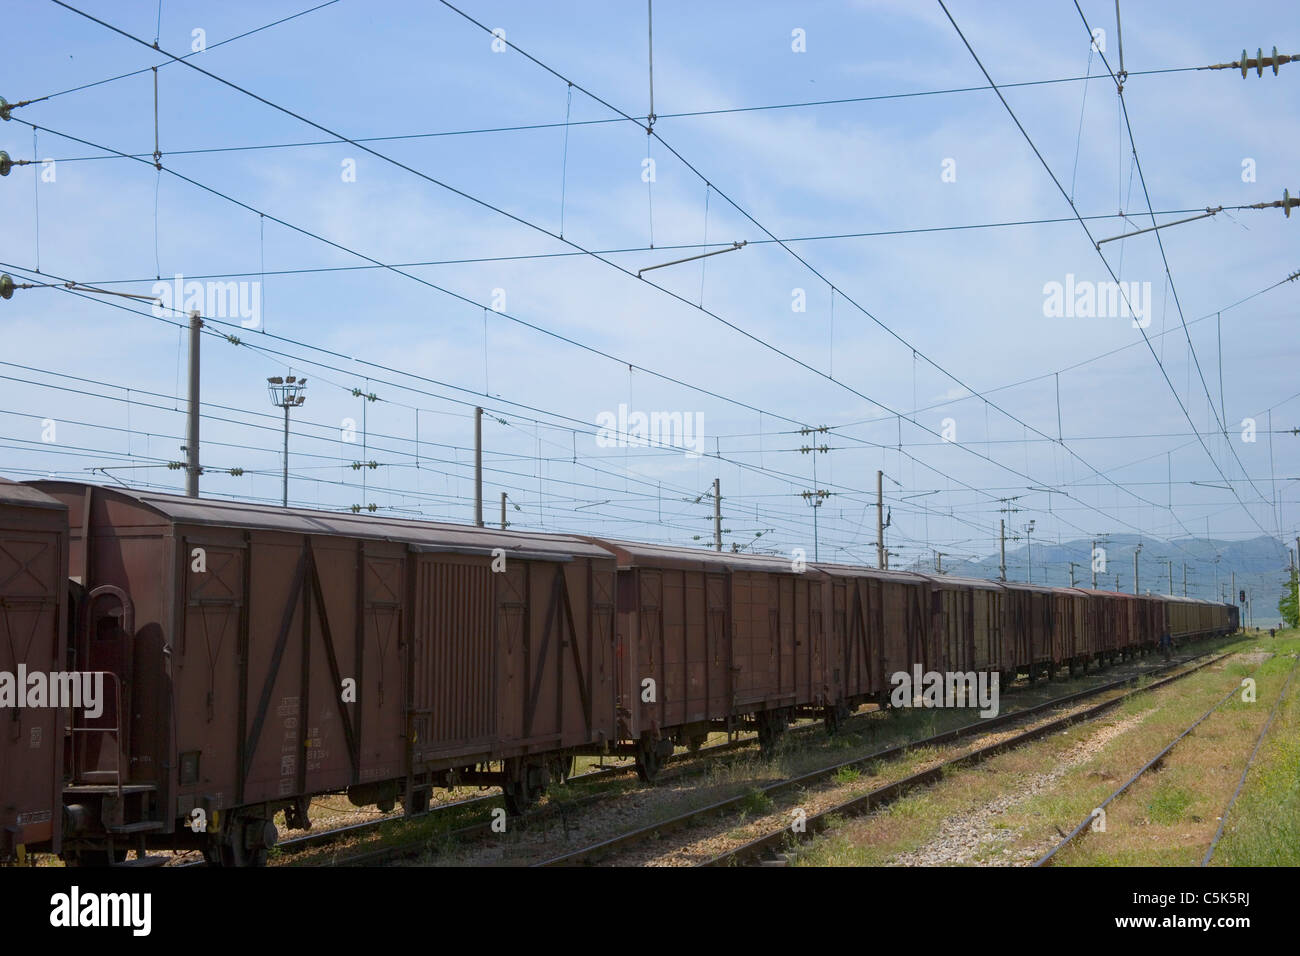 Freight train and power lines as seen from inside the railroad station, Fevzipasa, near Gaziantep / Antep, Turkey Stock Photo